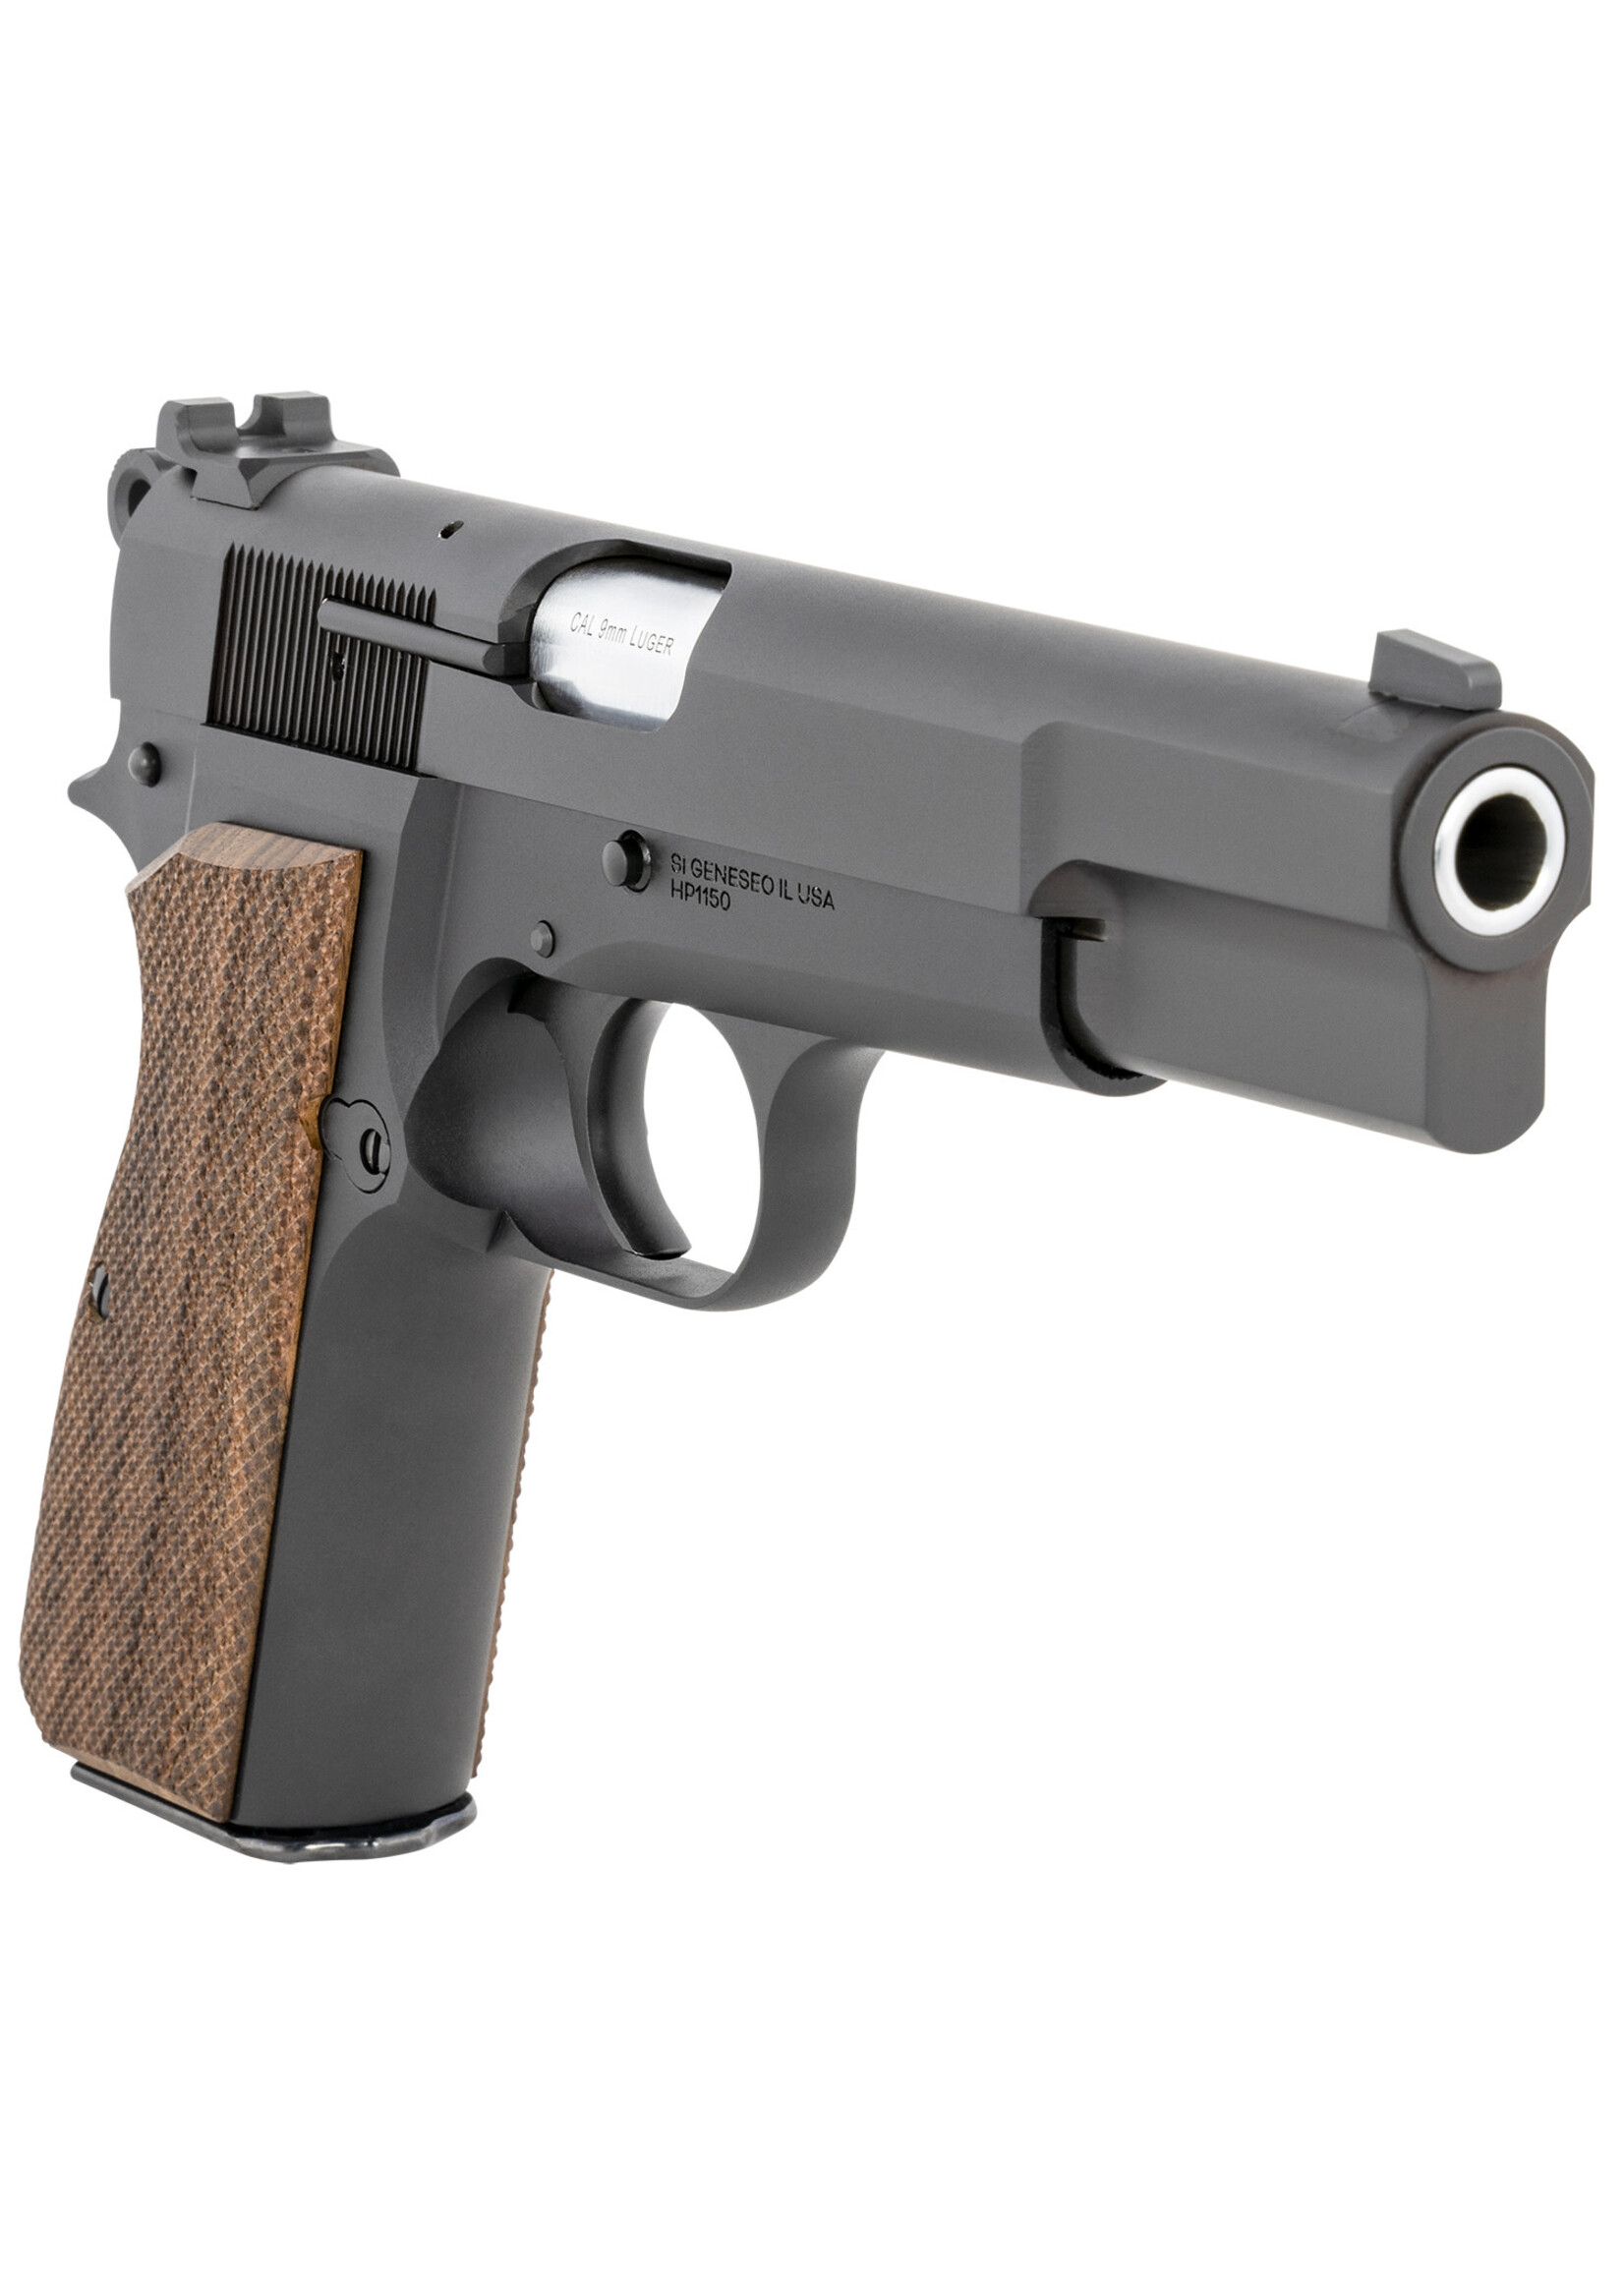 Springfield Armory Springfield Armory HP9201 SA-35 9mm Luger 15+1 4.70" Cold Hammer Forged Barrel, Matte Blued Carbon Steel Frame & Serrated Slide, Checkered Walnut Grip & White Dot Front/Serrated Rear Sights